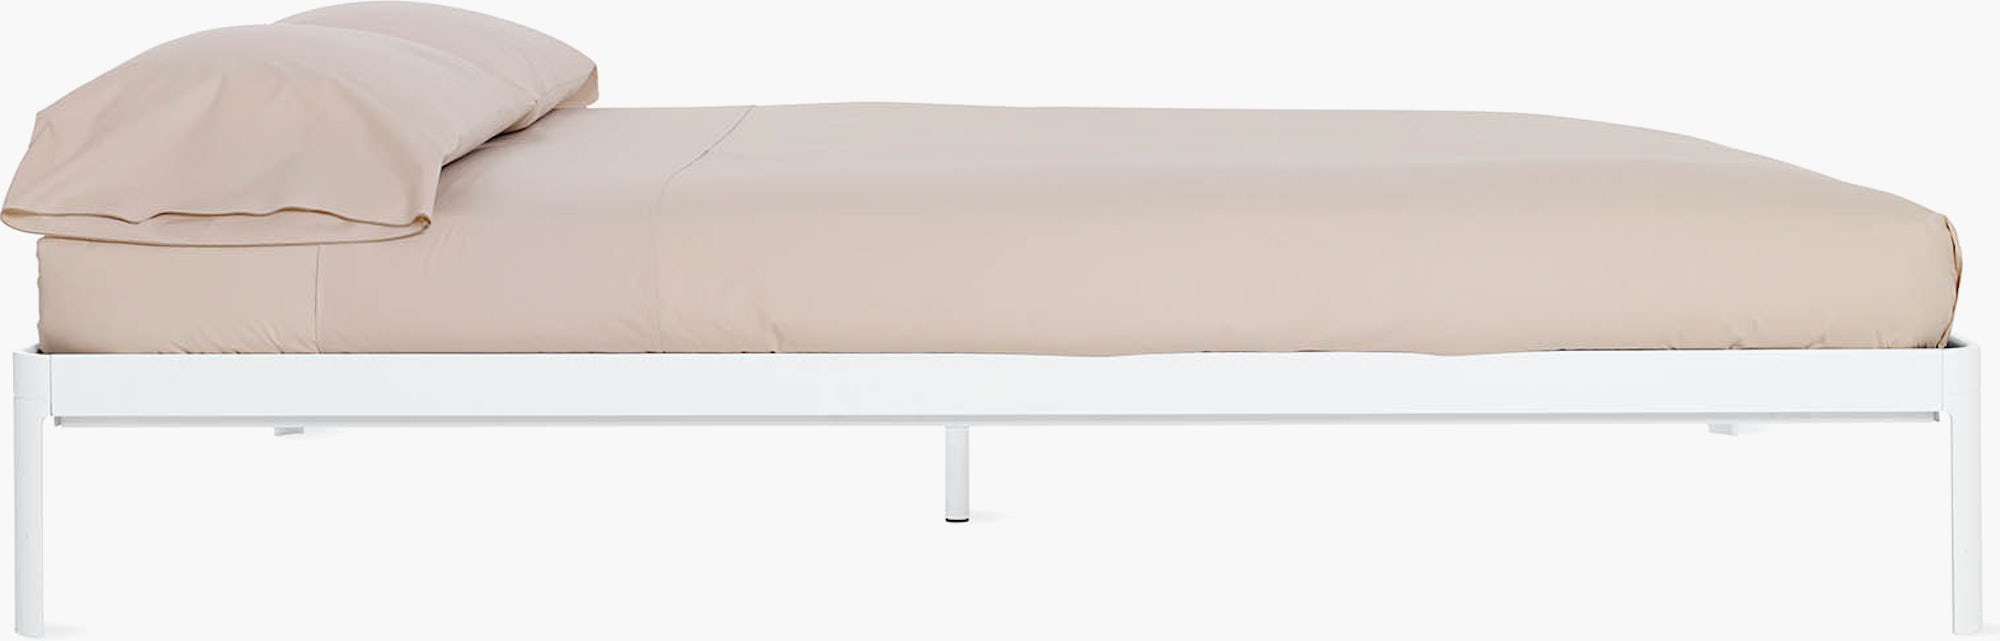 Min Bed Design Within Reach, Min Bed Frame